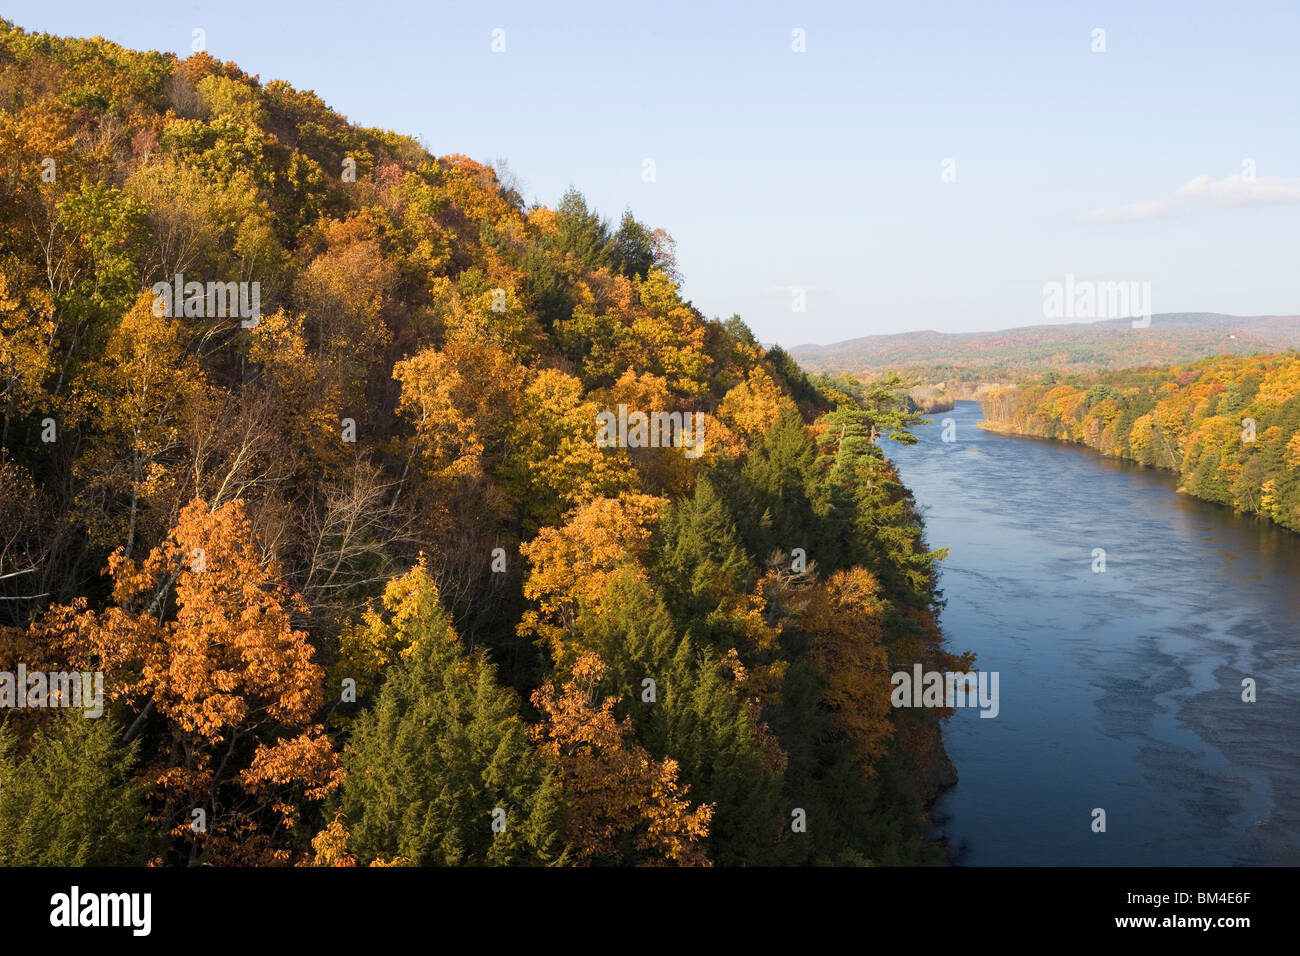 The Connecticut River in fall as seen from the French King Bridge in Erving, Massachusetts.  Route 2 - Mohawk Highway. Stock Photo